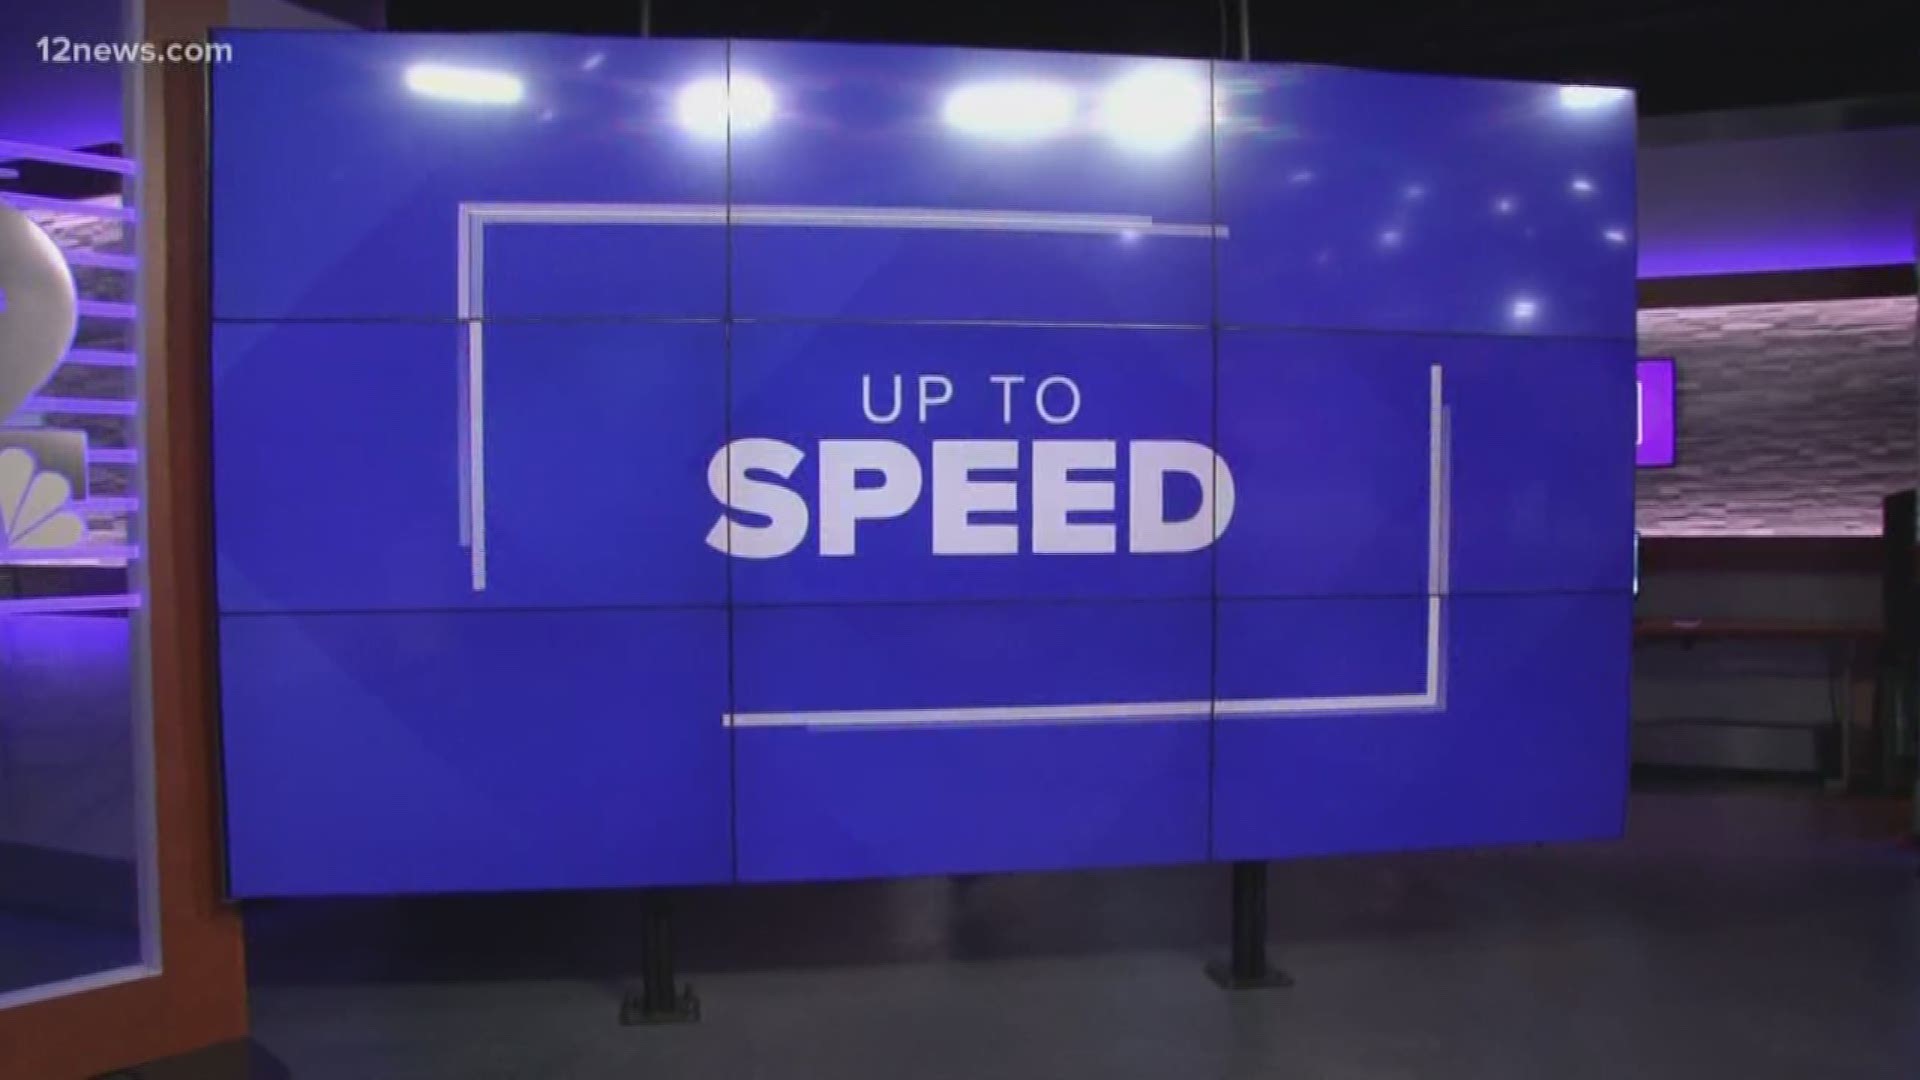 We get you "Up to Speed" on the latest news happening around the Valley and across the country on Thursday afternoon.